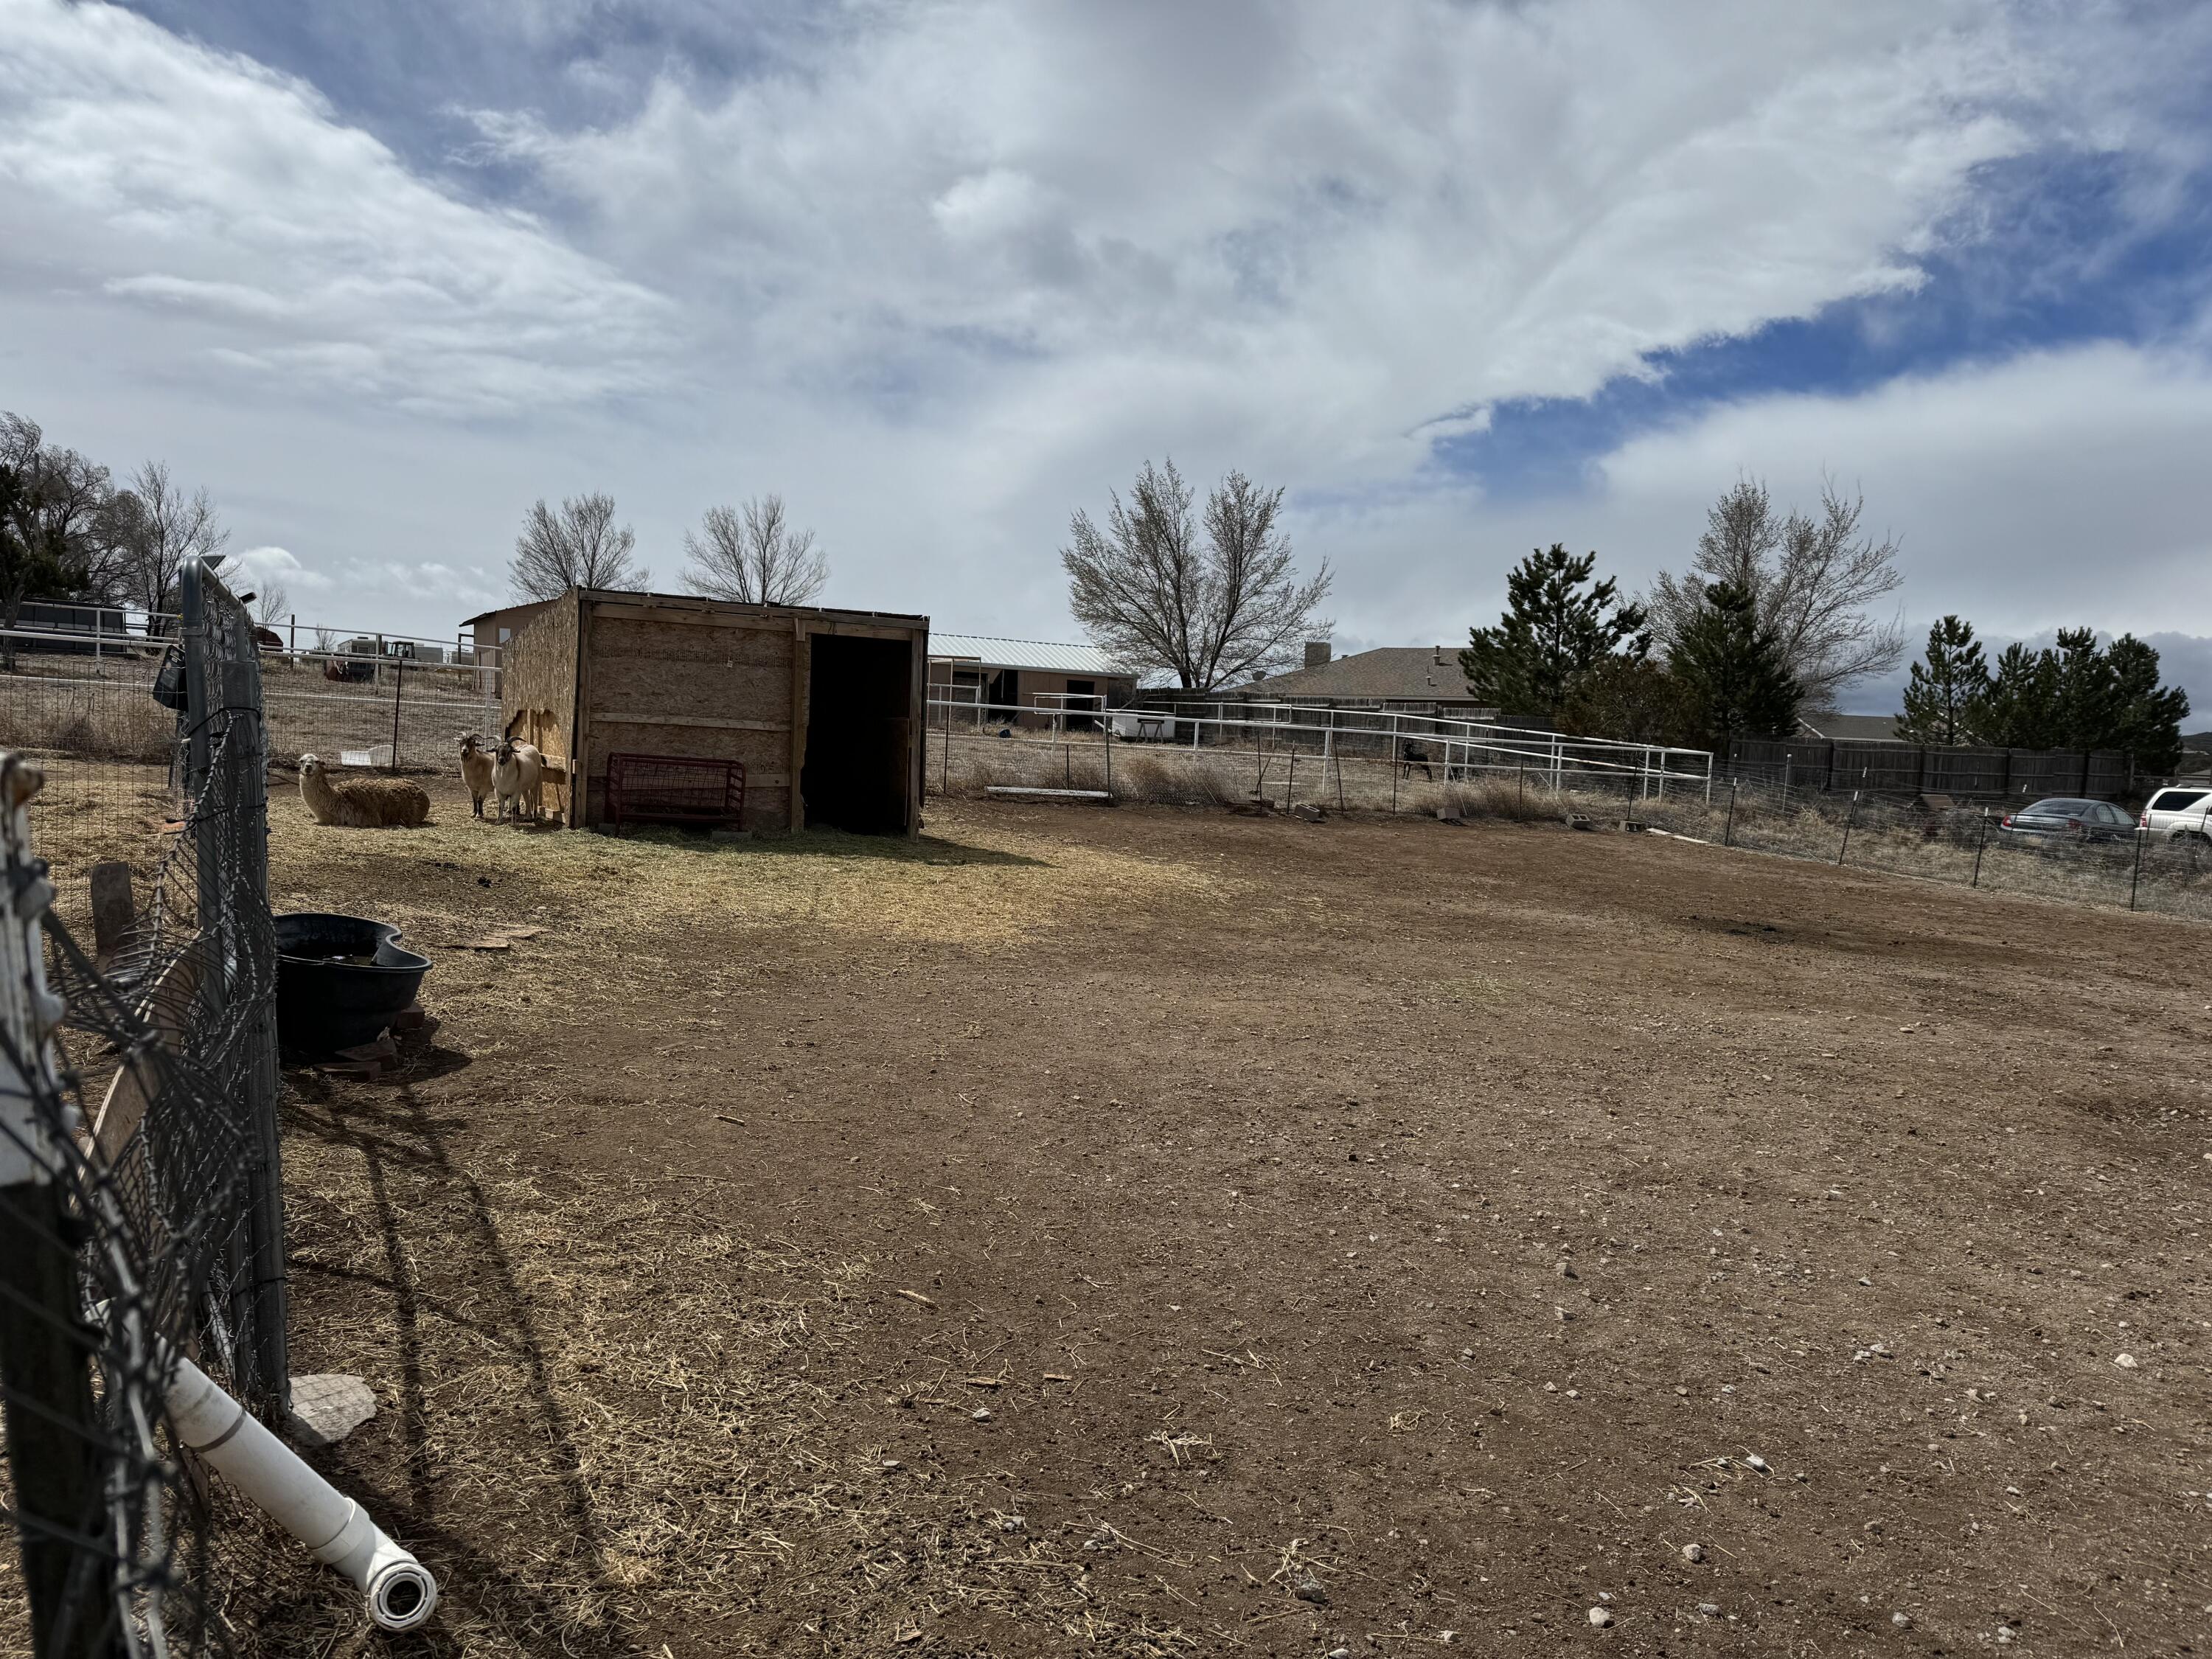 26 V Hill Road SE, Edgewood, New Mexico 87015, 2 Bedrooms Bedrooms, ,1 BathroomBathrooms,Residential,For Sale,26 V Hill Road SE,1059430